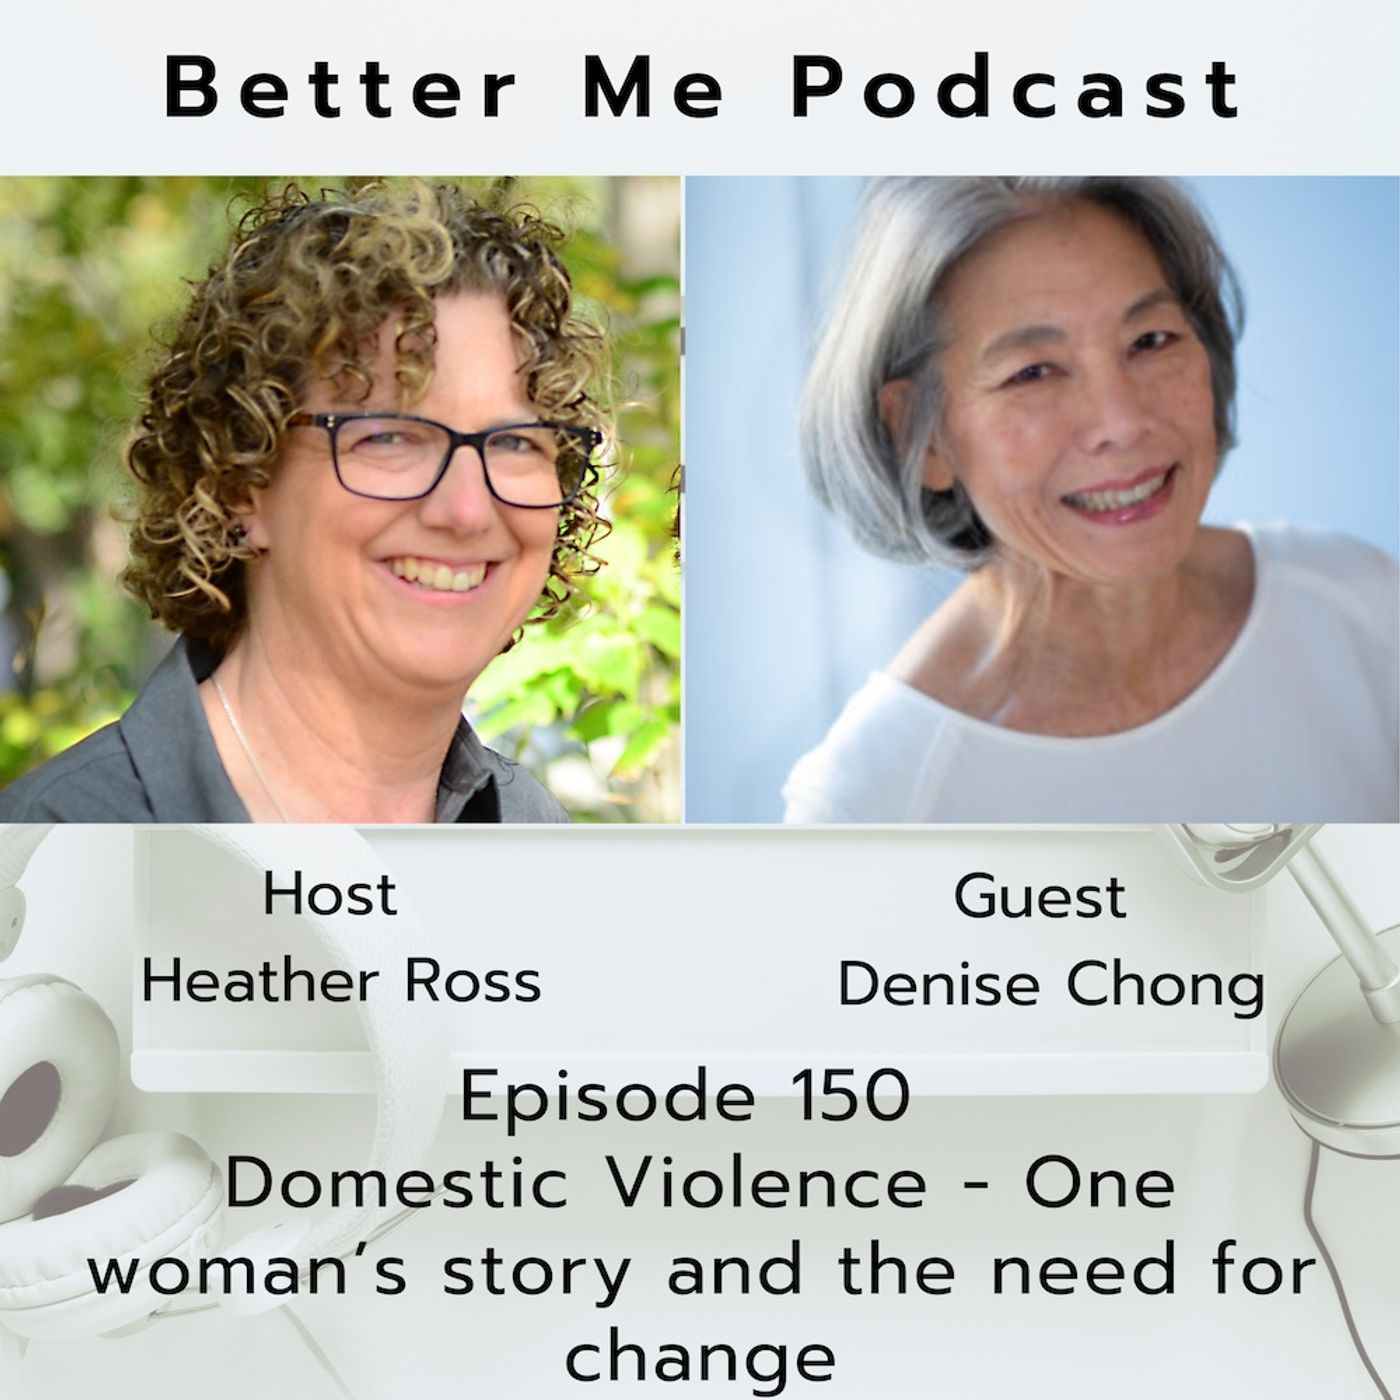 EP 150 Domestic Violence - One woman’s story and the need for change (with guest Denise Chong)